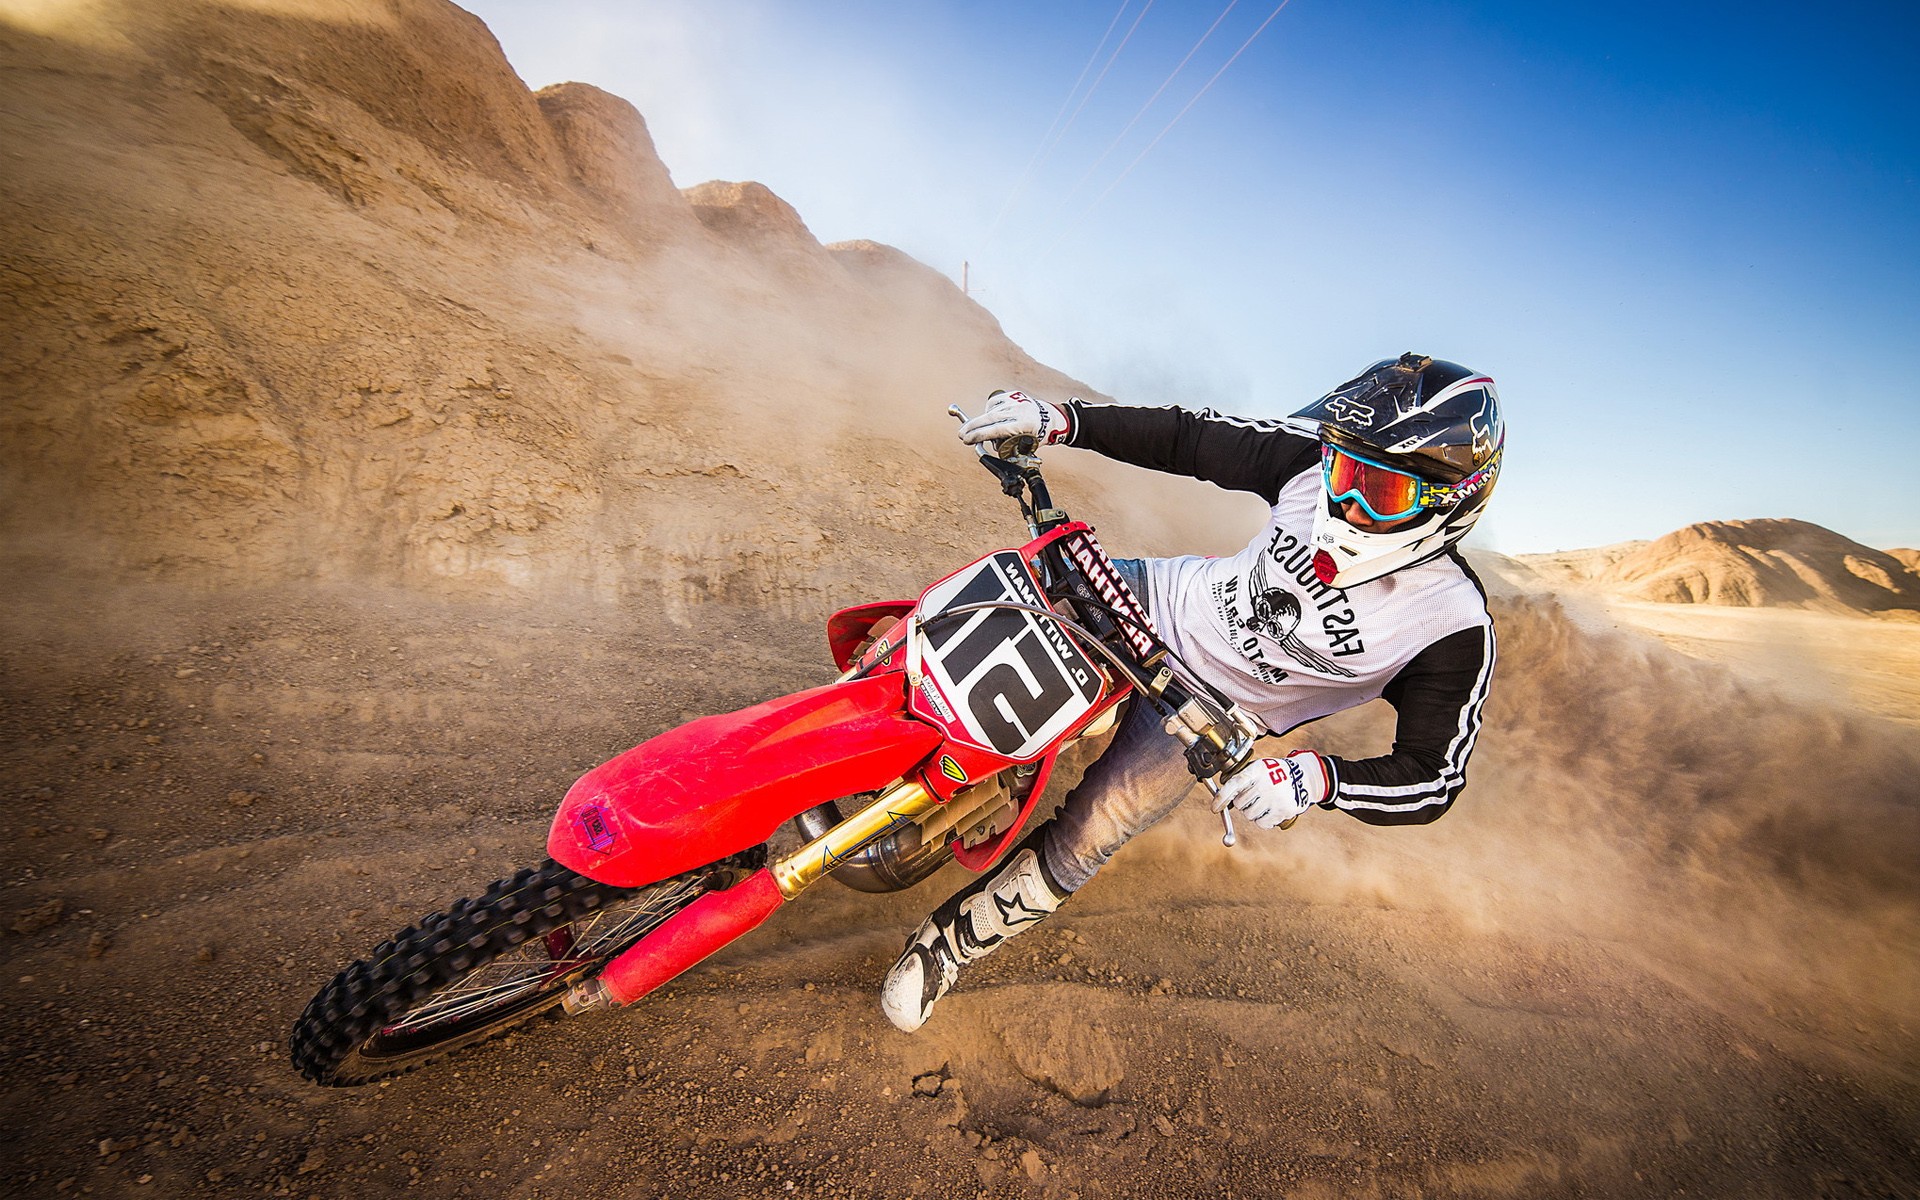 Dirt Bike, HD Bikes, 4k Wallpapers, Images, Backgrounds ...